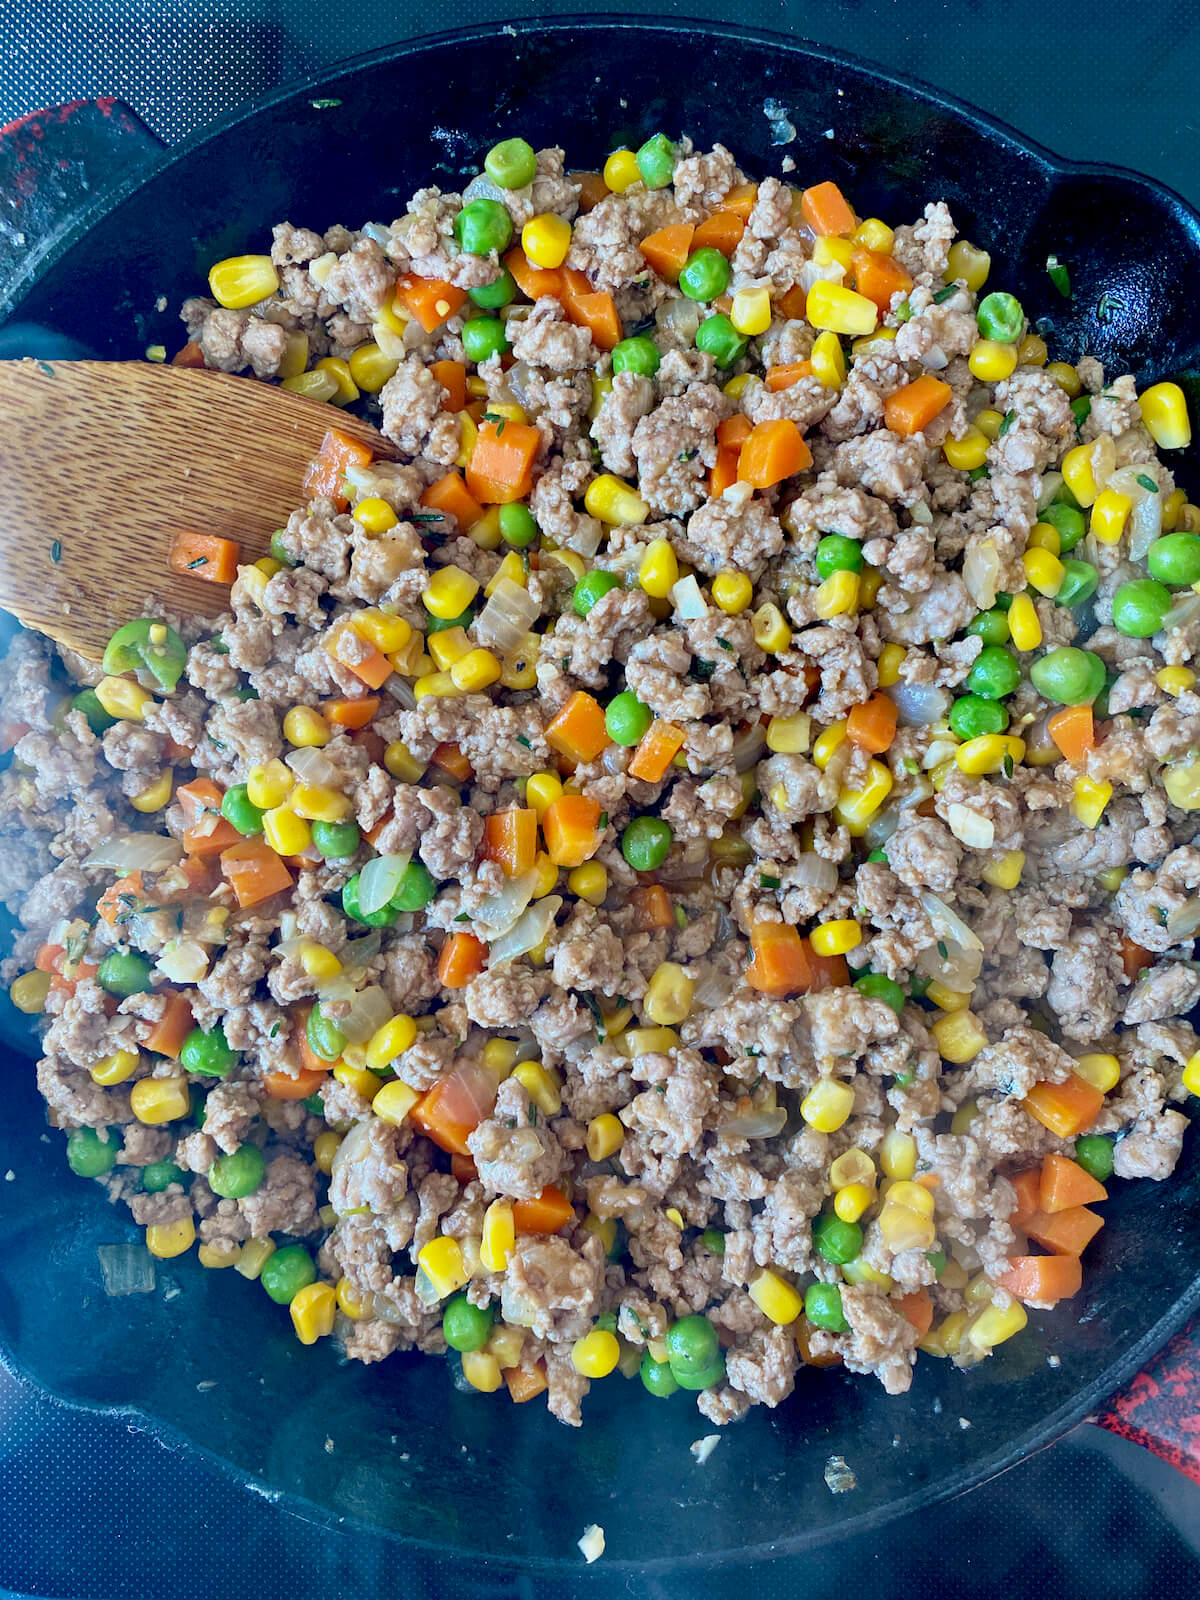 The finished ground turkey shepherd's pie filling in a cast iron skillet. There is a wooden spoon sticking out of the skillet to the left.